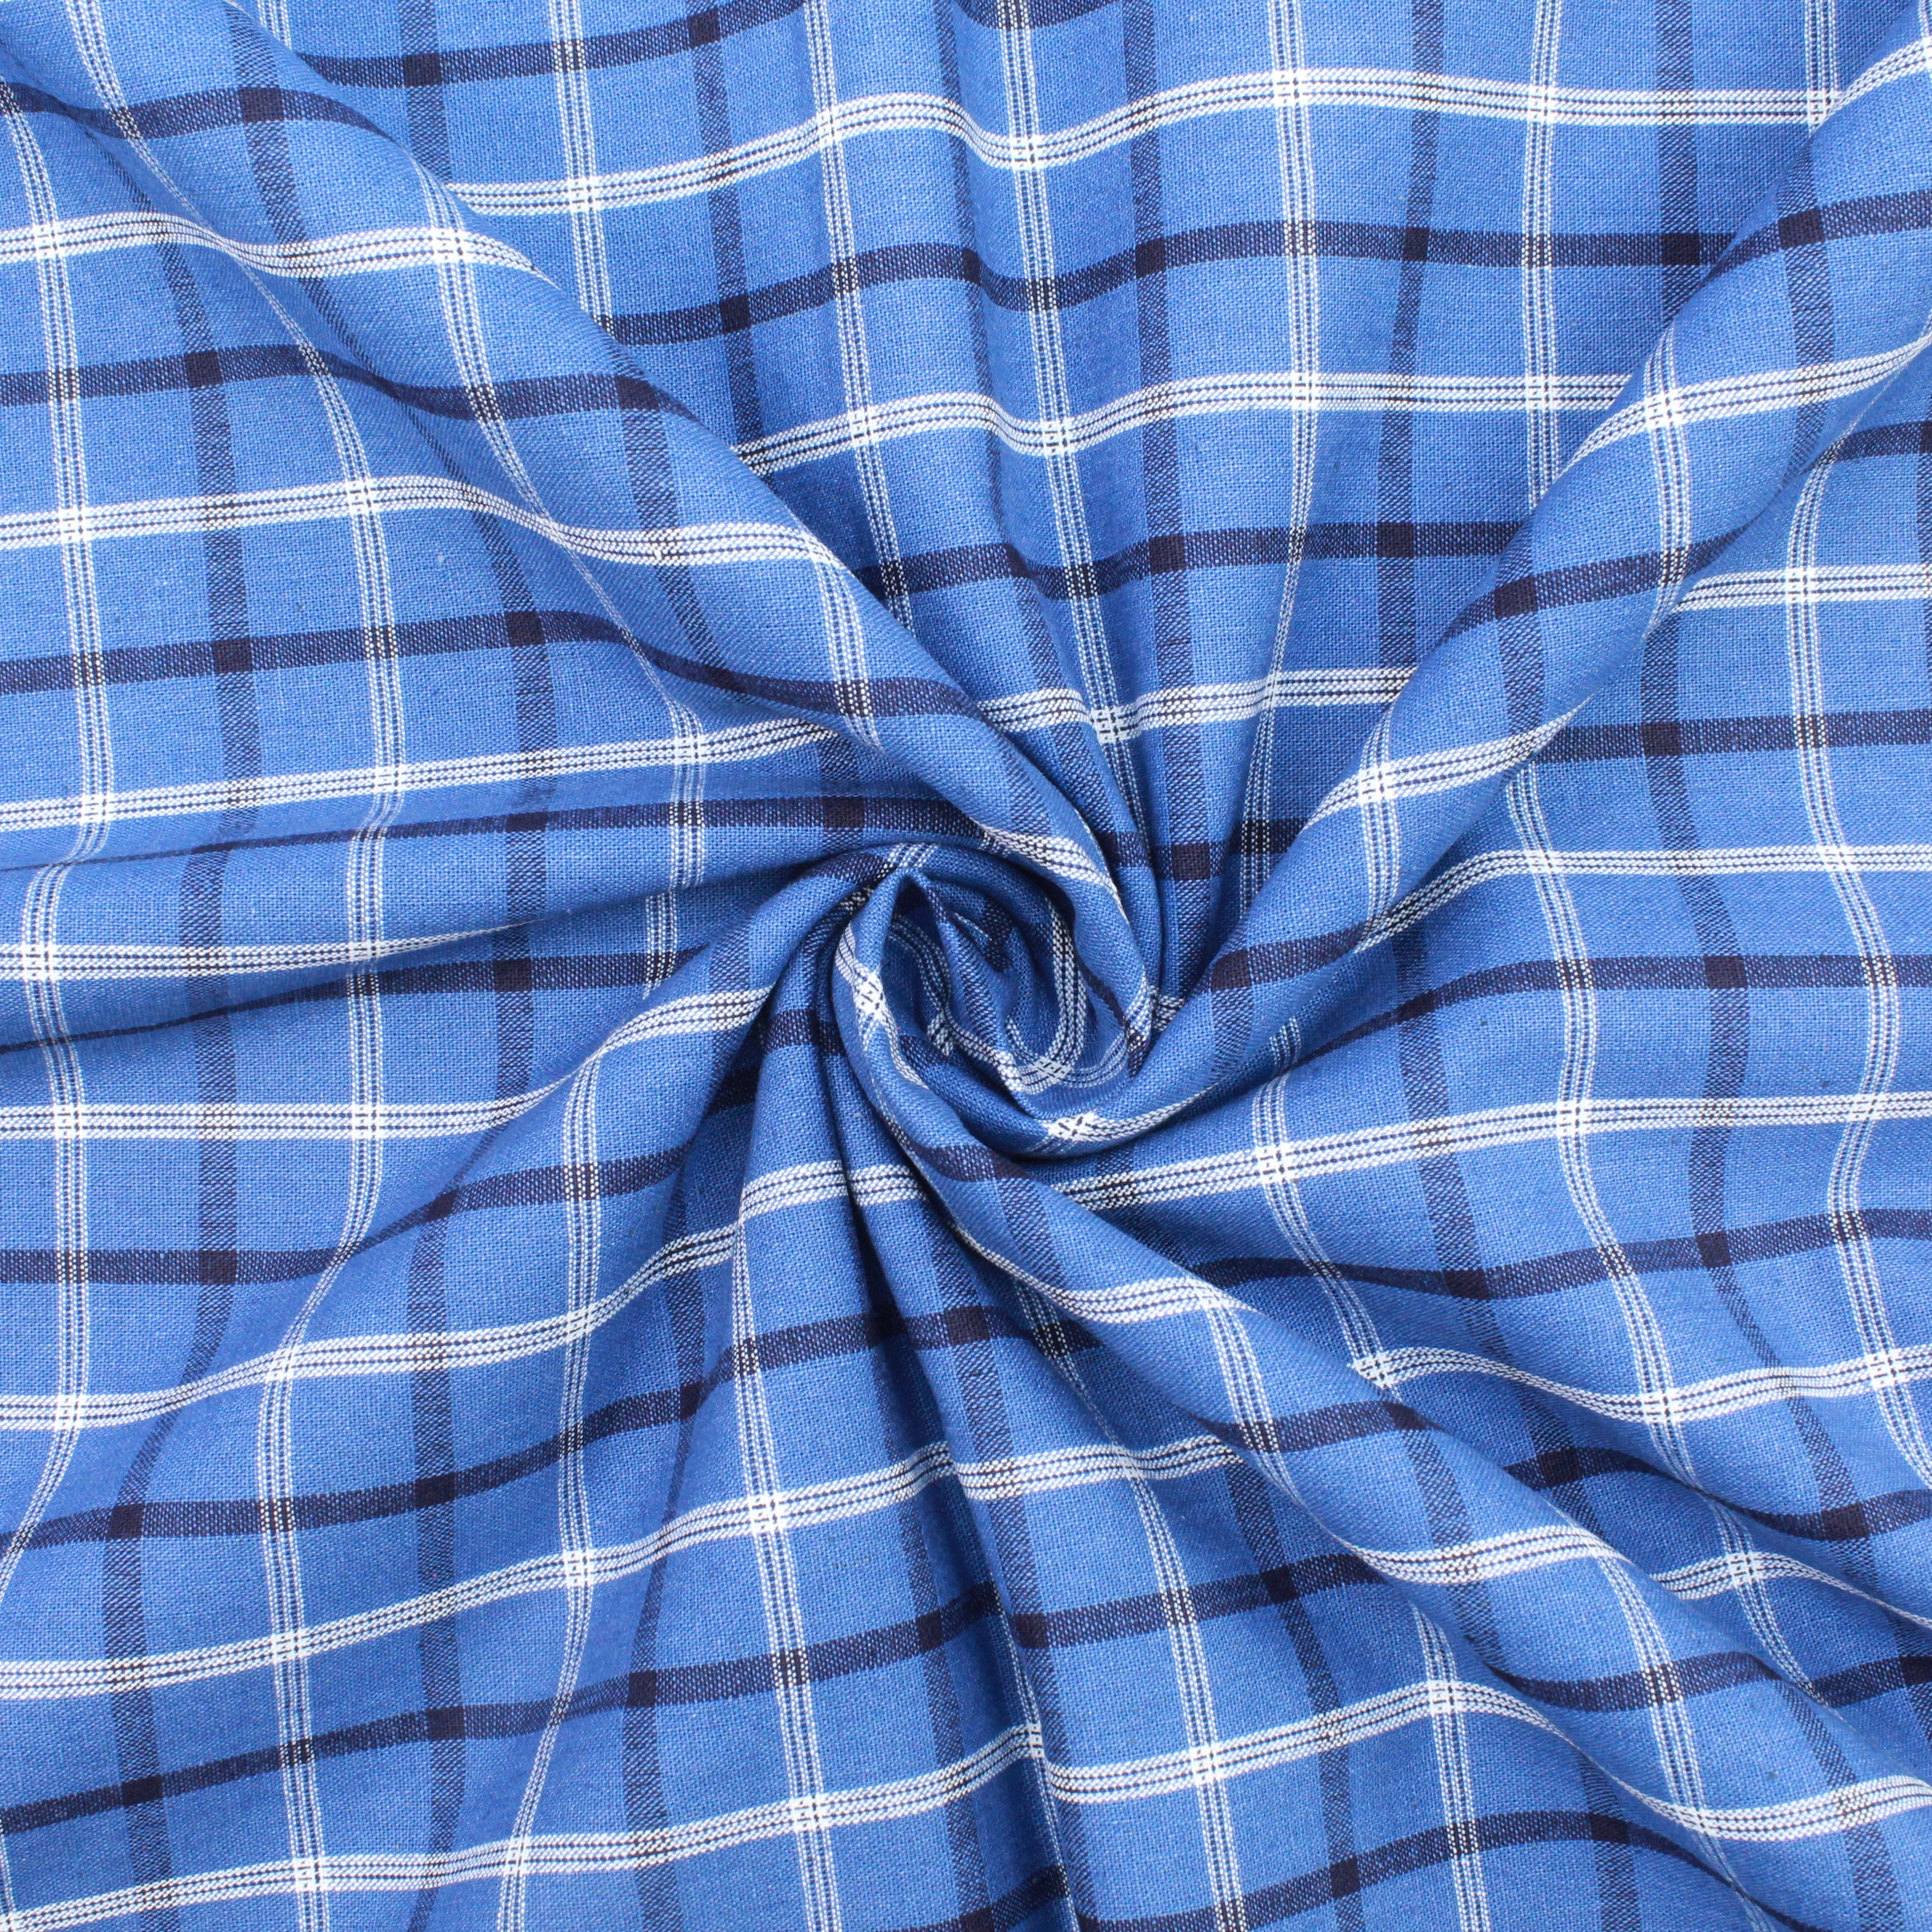 3FOR12 Premium Quality, Fashion Chequered Linen 54" Wide Blue